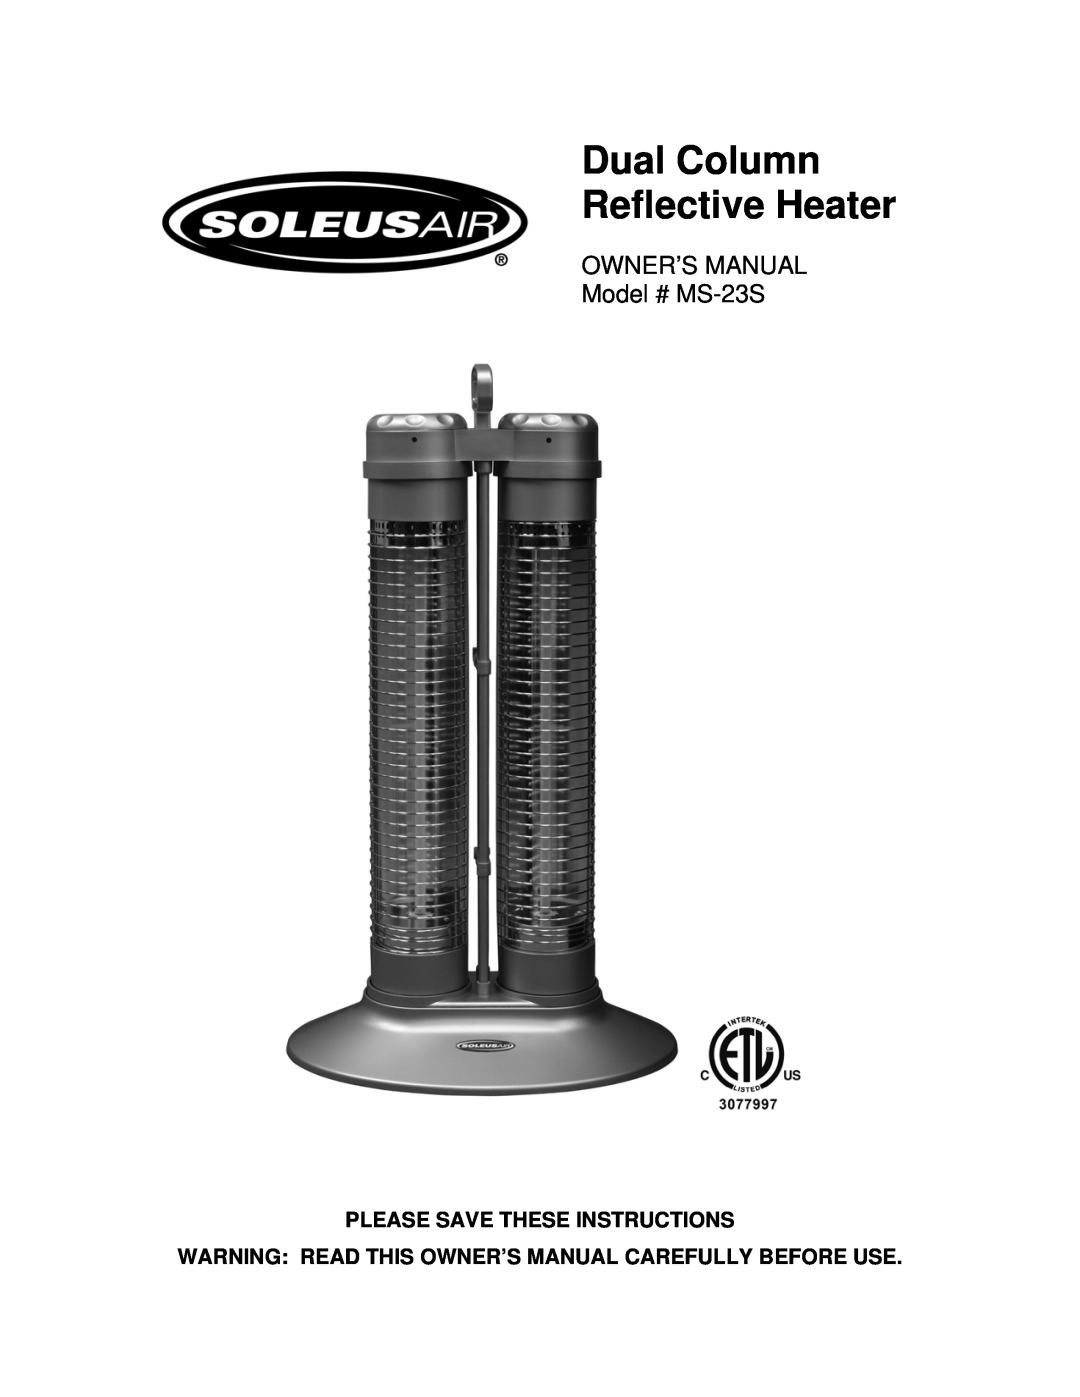 Soleus Air MS-23S owner manual Please Save These Instructions, Dual Column Reflective Heater 